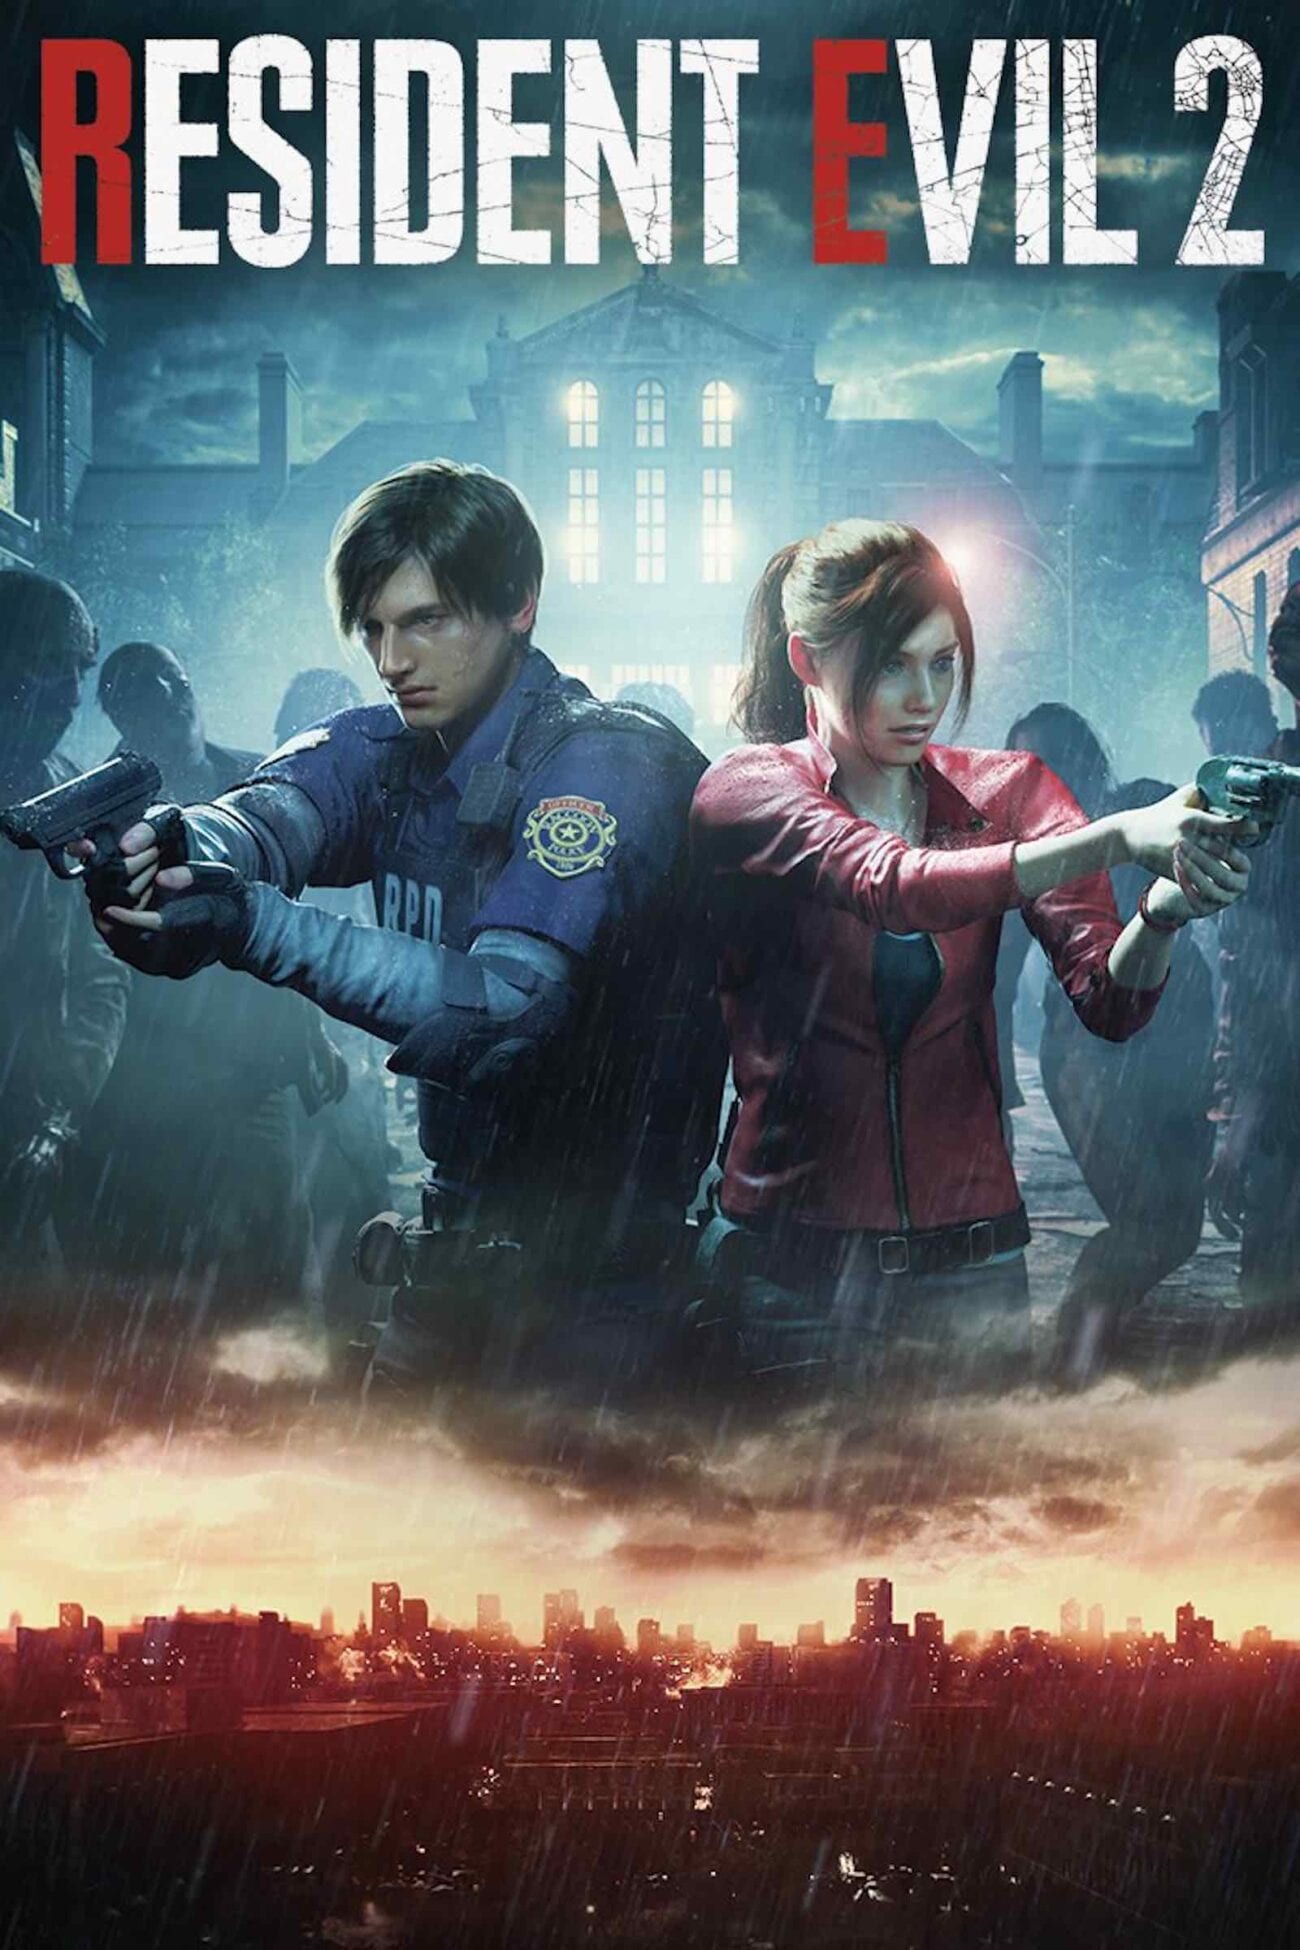 The popular 'Resident Evil' games are getting a live action adaptation on Netflix. Grab your shotguns and dive into the latest news about this adaptation.